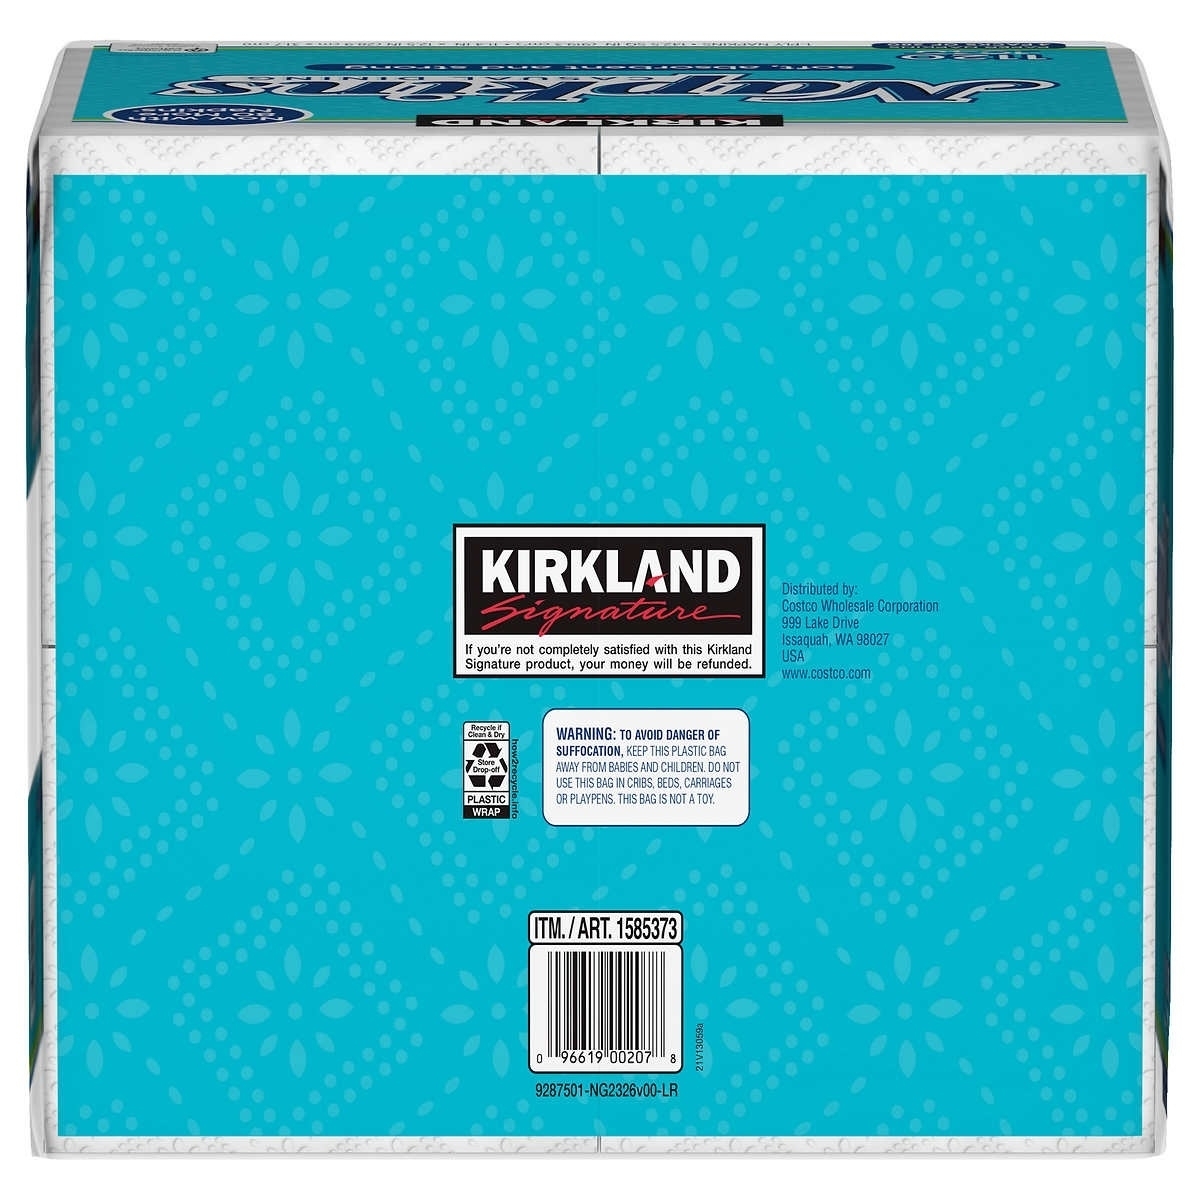 Kirkland Signature Napkin, 1-Ply, 280 Count (Pack Of 4)